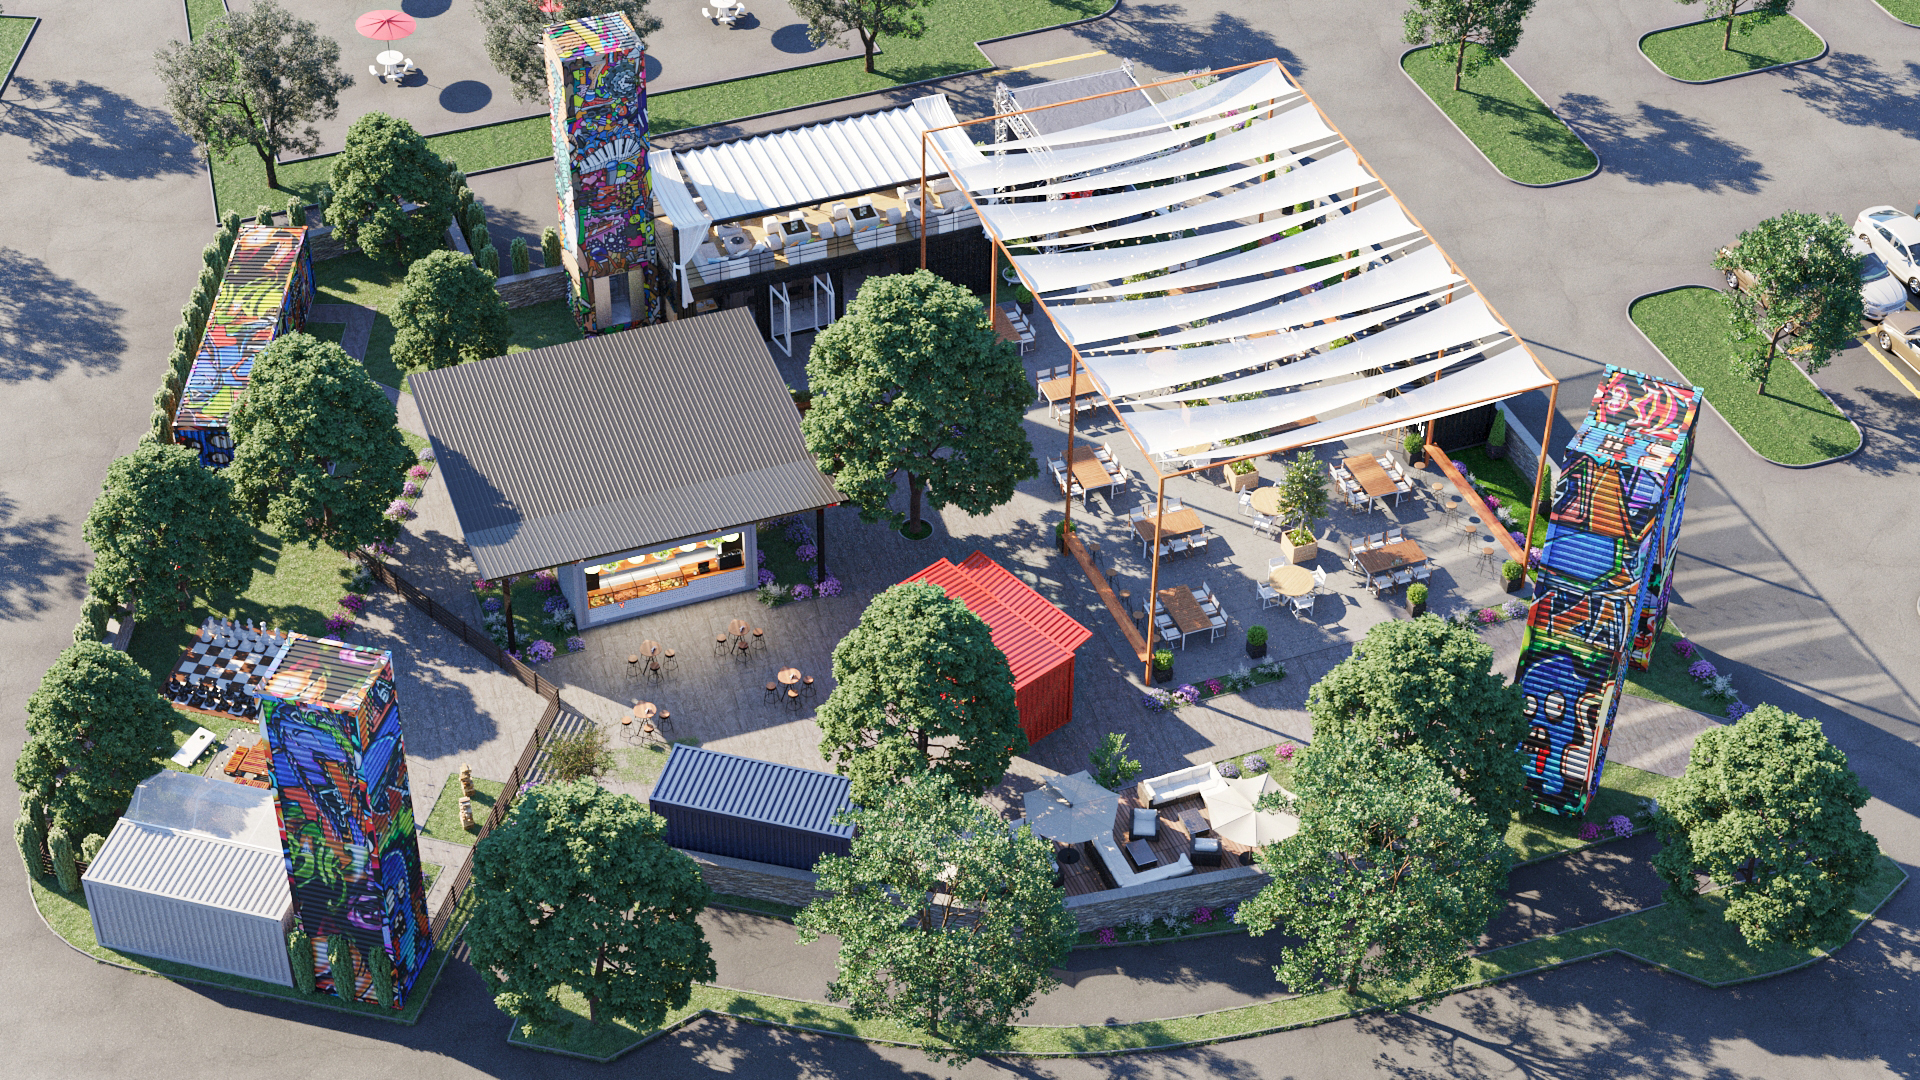 An aerial rending of the food court area.